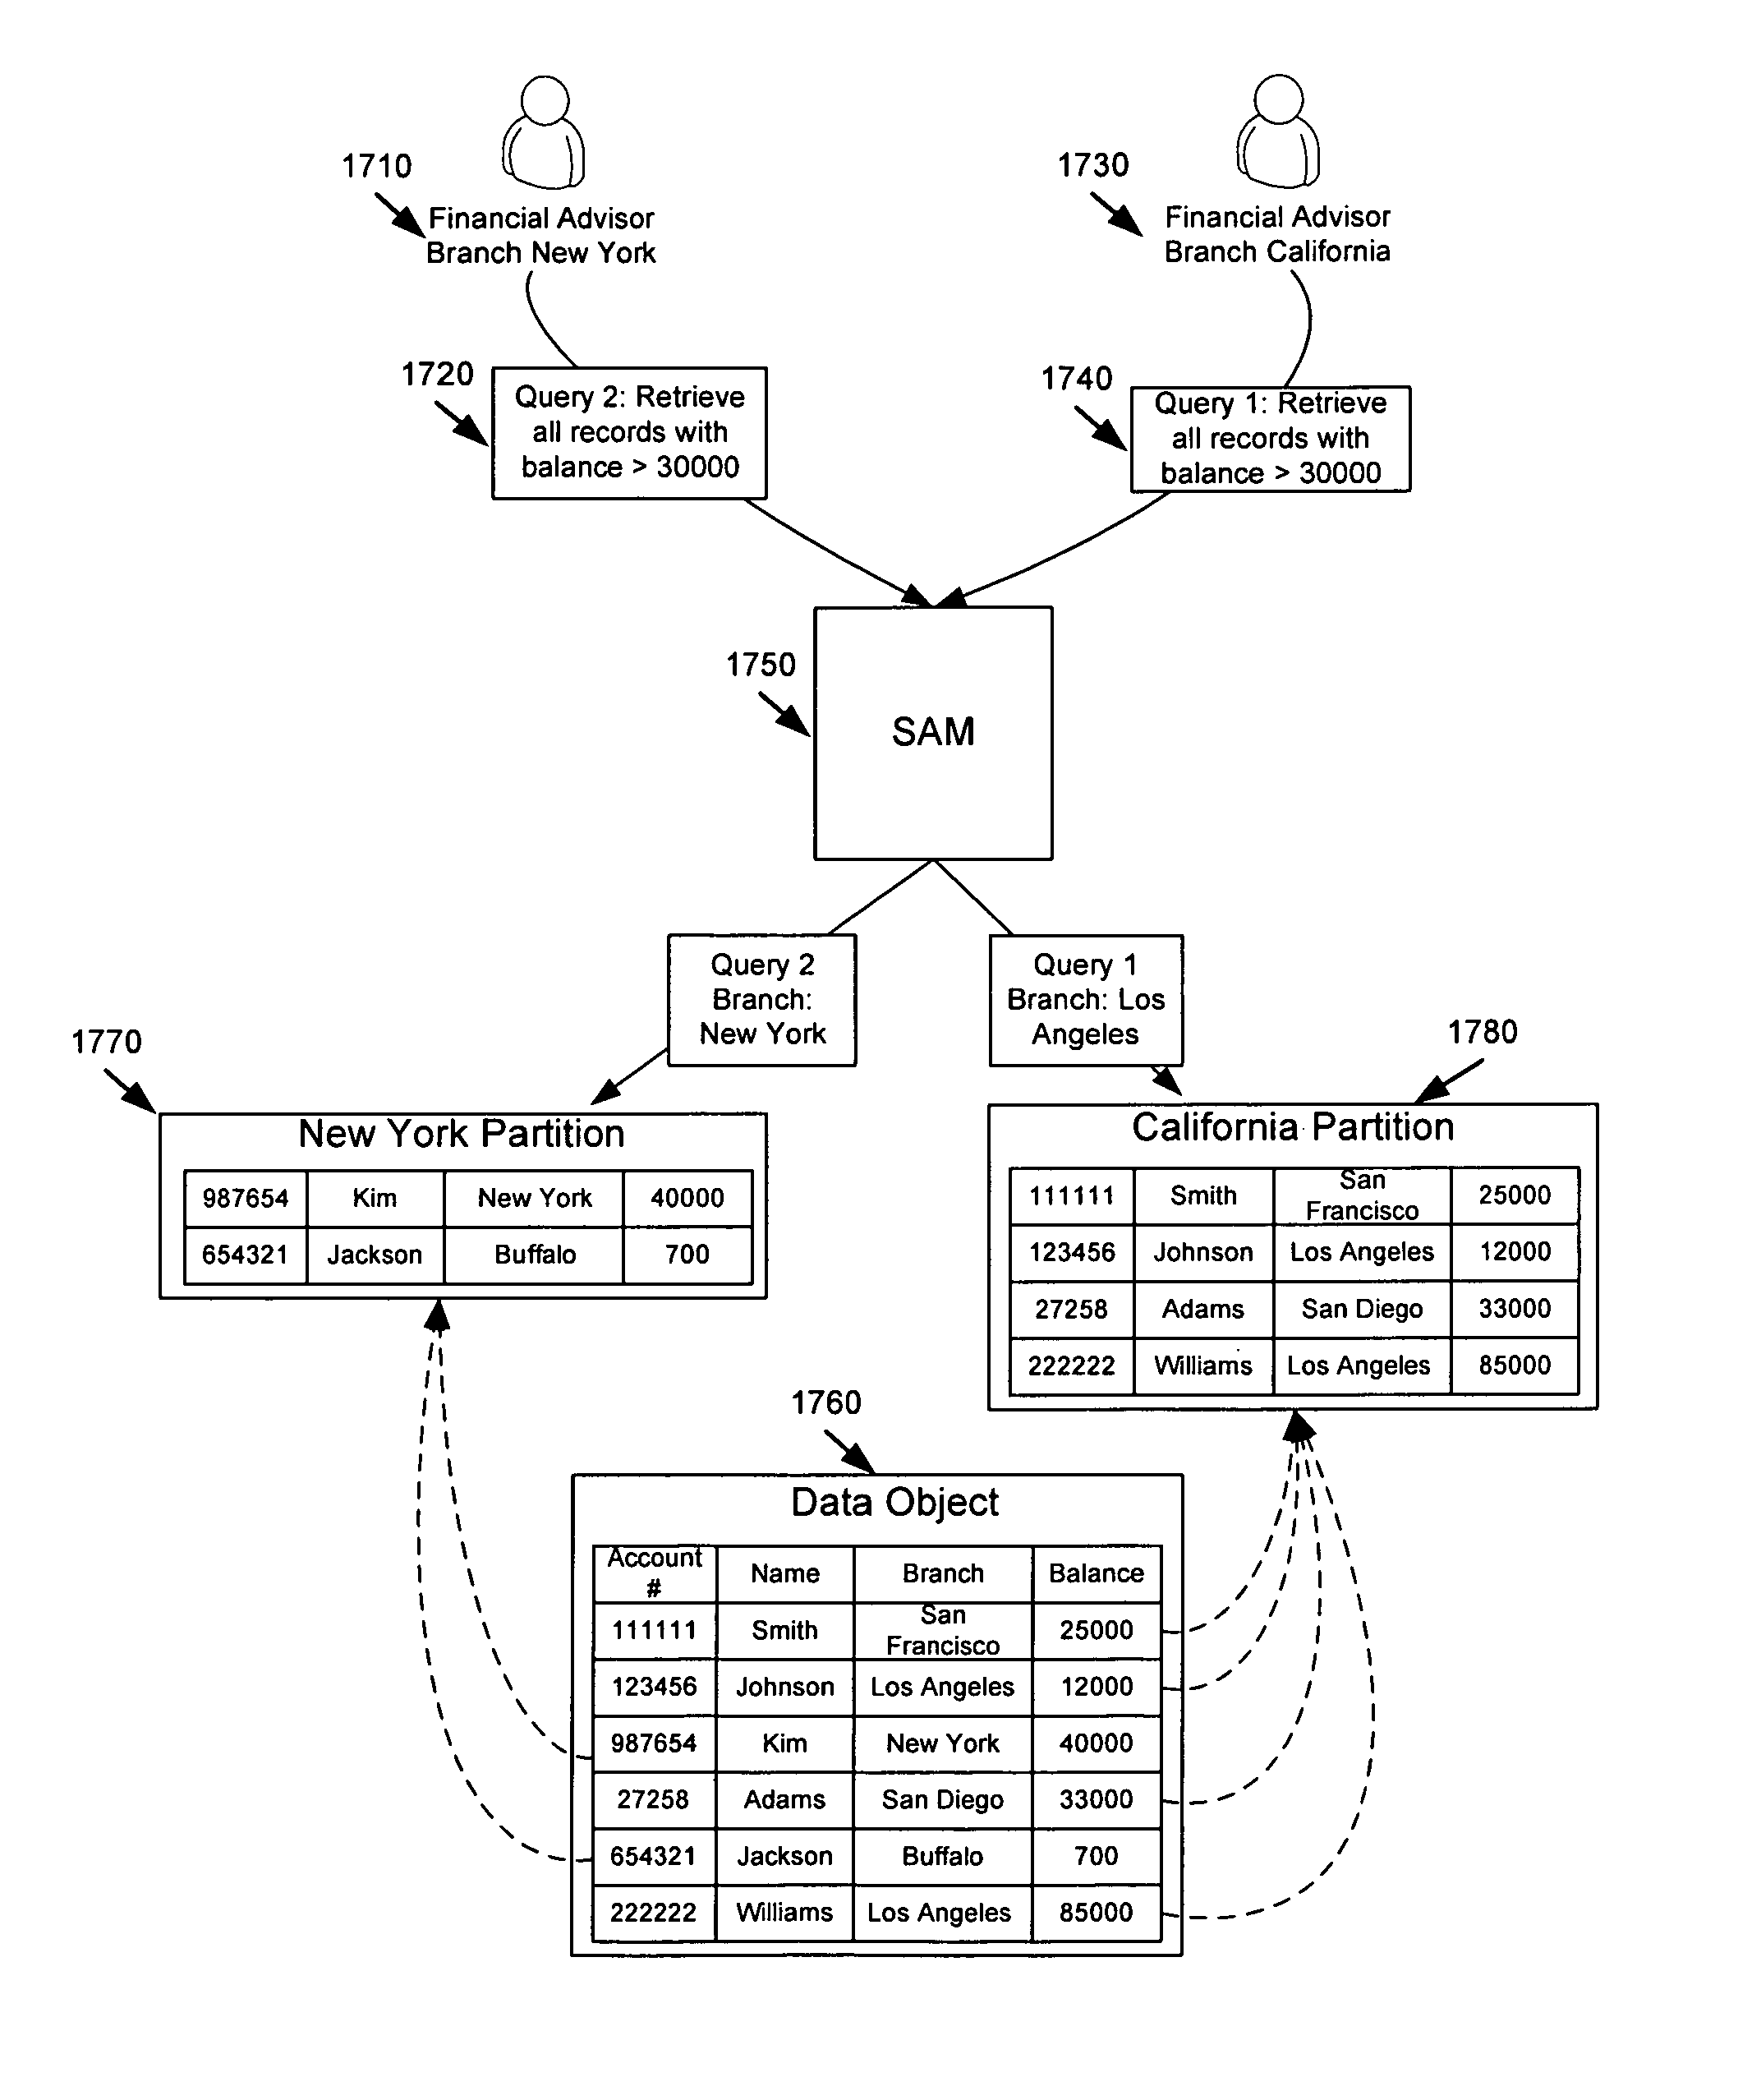 System and method for efficiently securing enterprise data resources